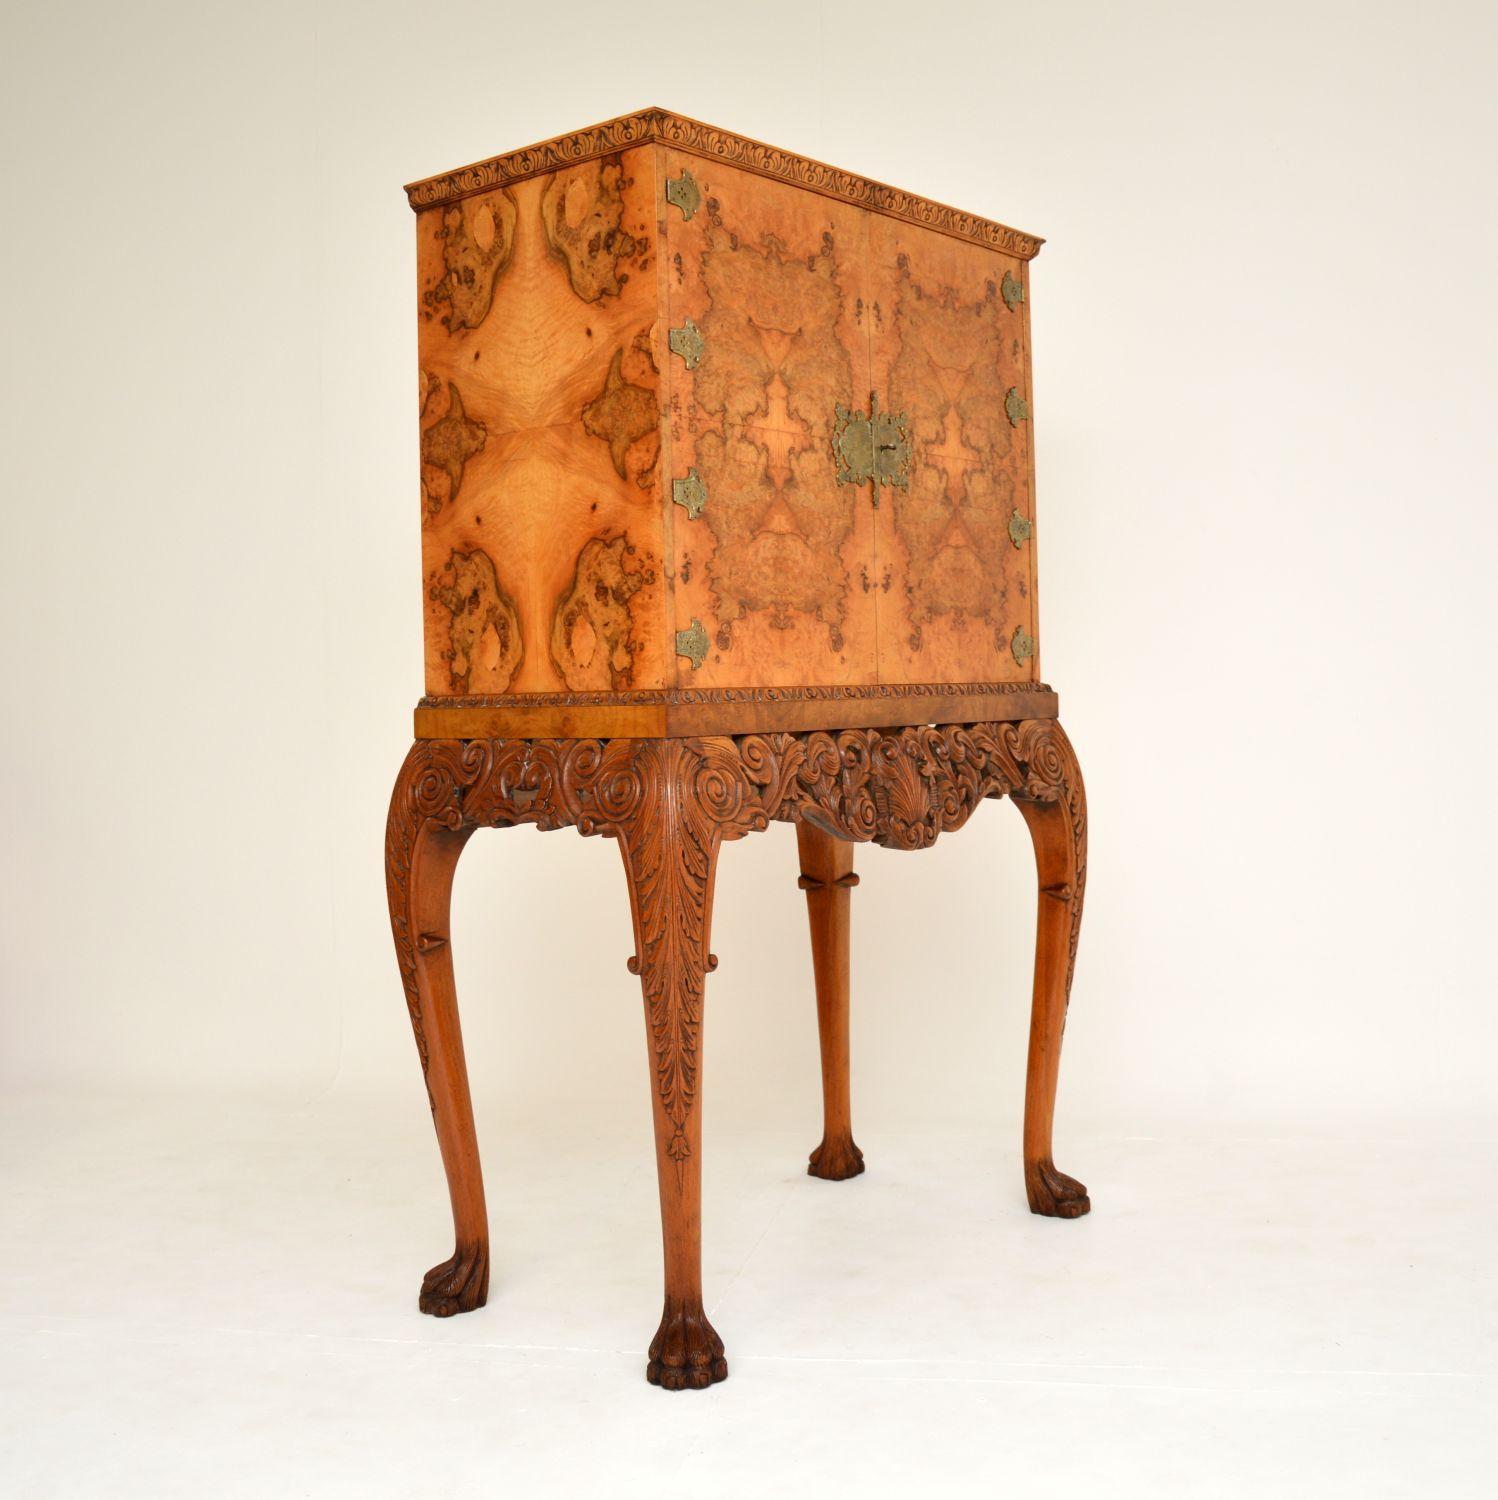 A stunning antique burr walnut cocktail cabinet in the Queen Anne style. This was made in England, it dates from around the 1920’s.

It is of superb quality, with gorgeous burr walnut grain patterns, crisp carving and fine ormolu mounts. The base